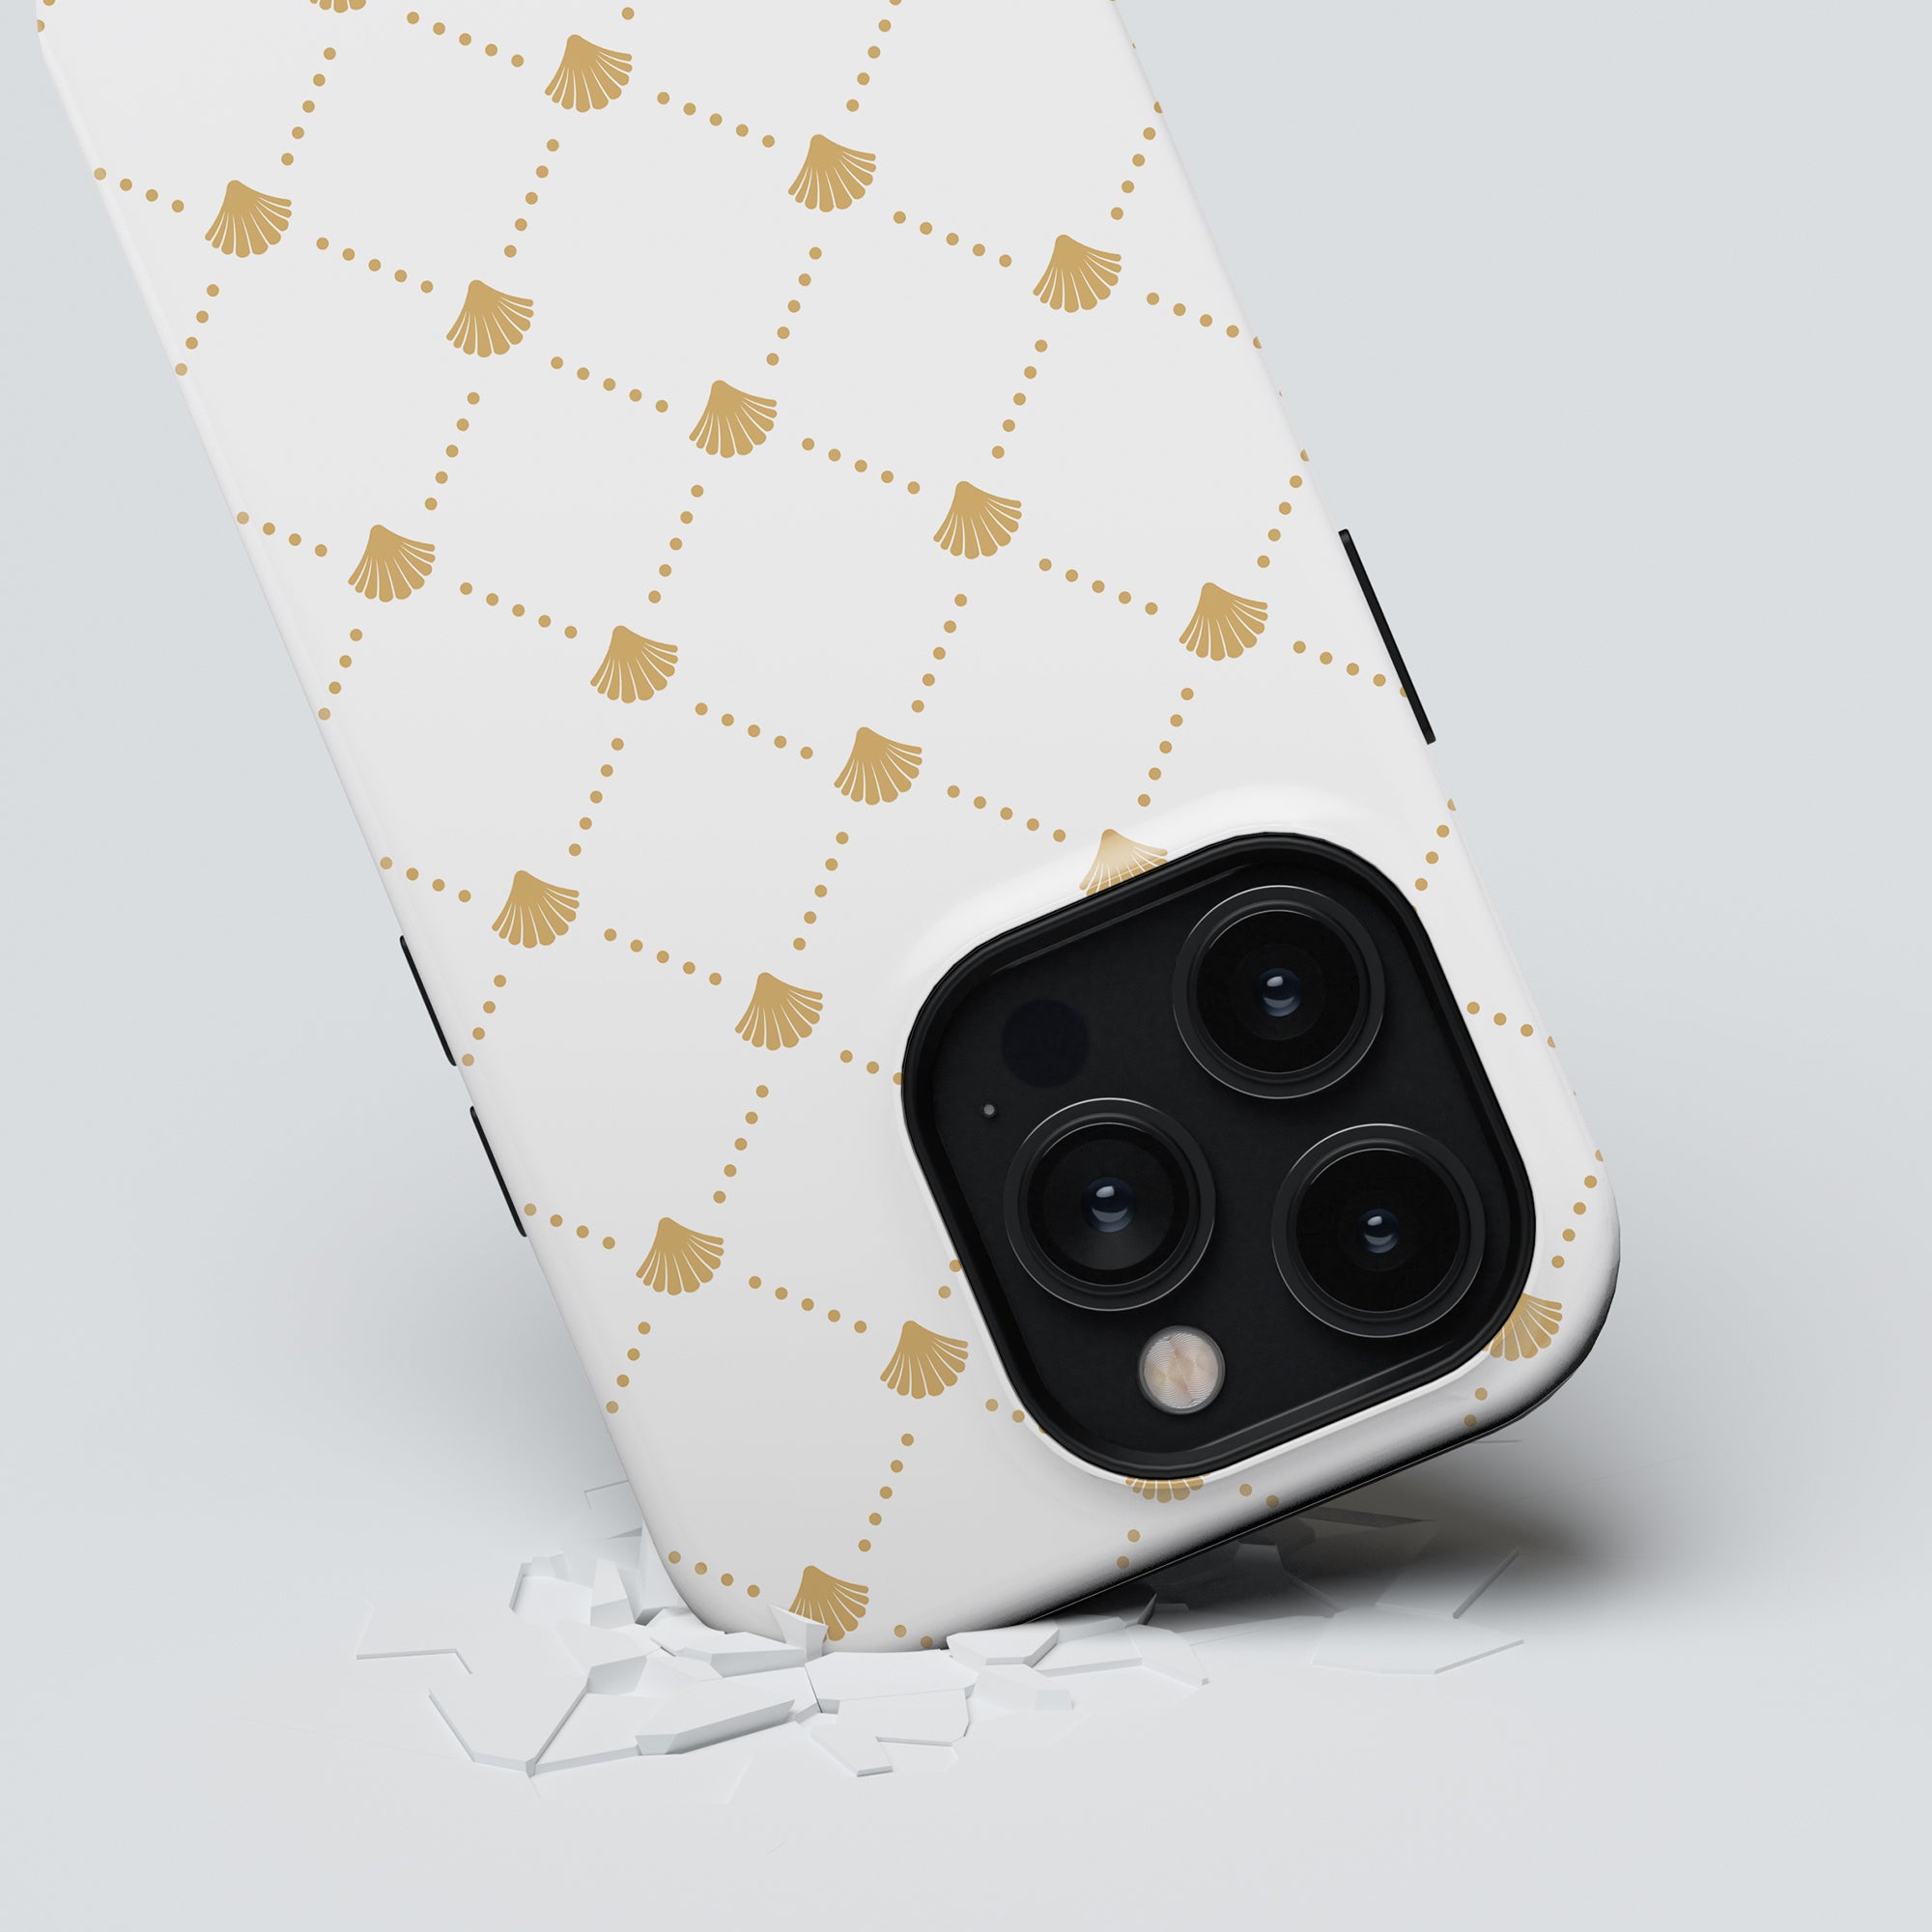 A Luxe Shells White - Tough Case, marked by its elegant gold pattern, lies face down on a cracked surface. Featuring a triple camera setup, this tough case from the Ocean Collection ensures both protection and style.